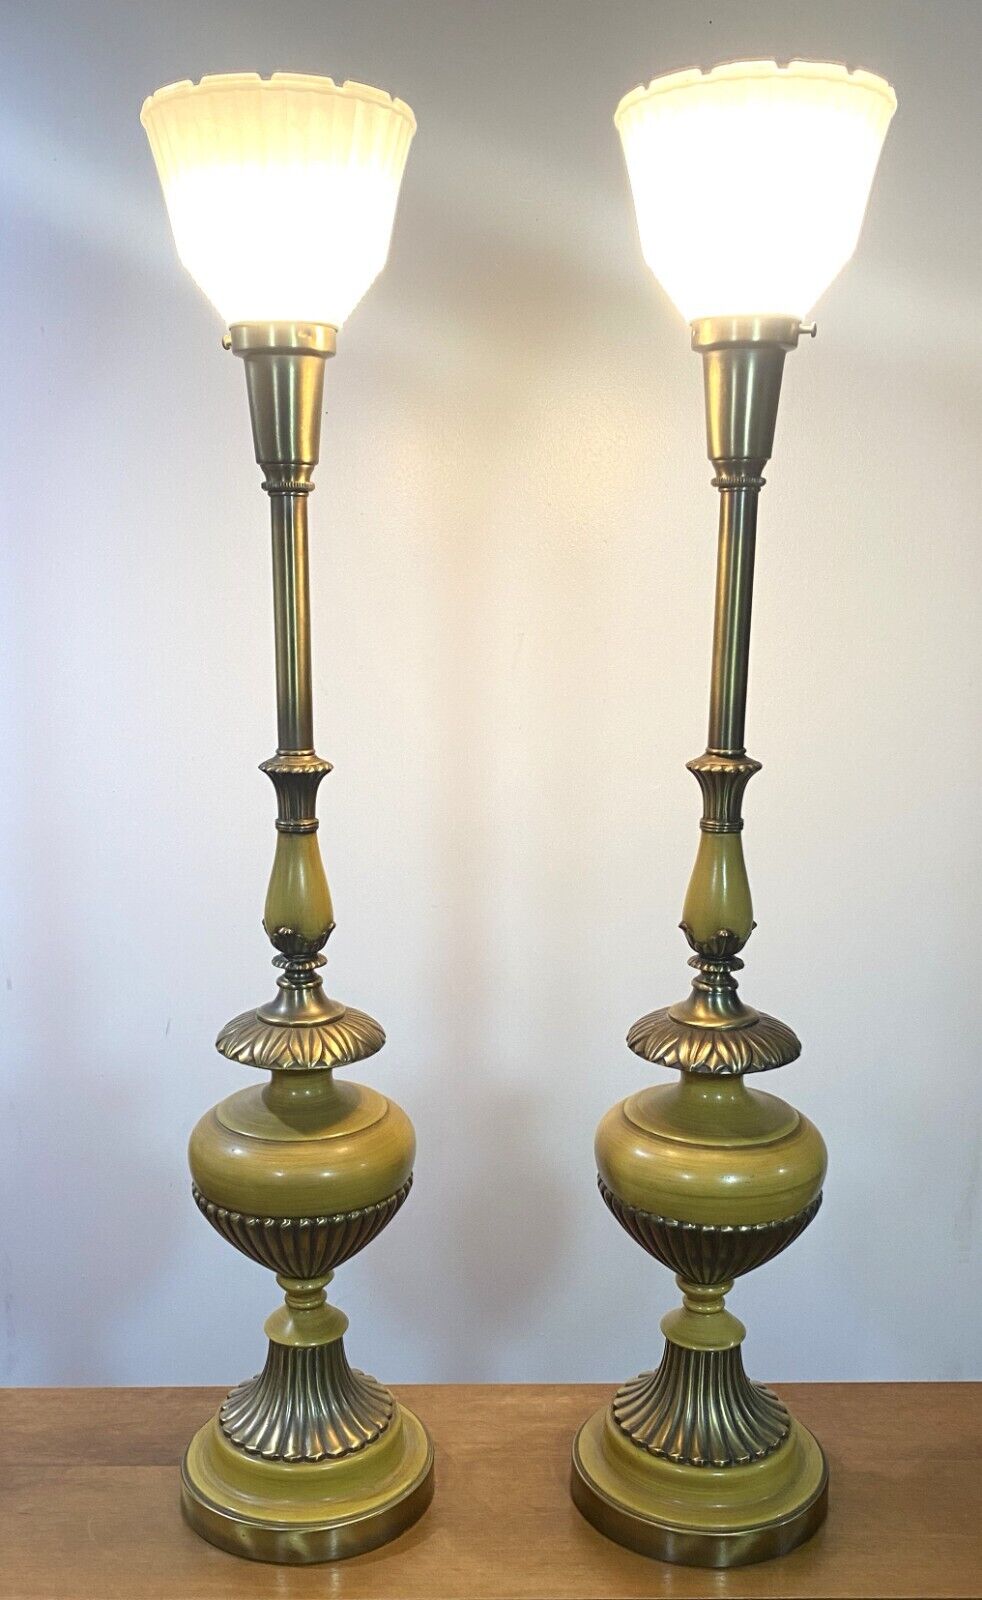 Vintage Pair MCM Torchiere Rembrandt Table Lamps Mustard Hollywood Regency 60s